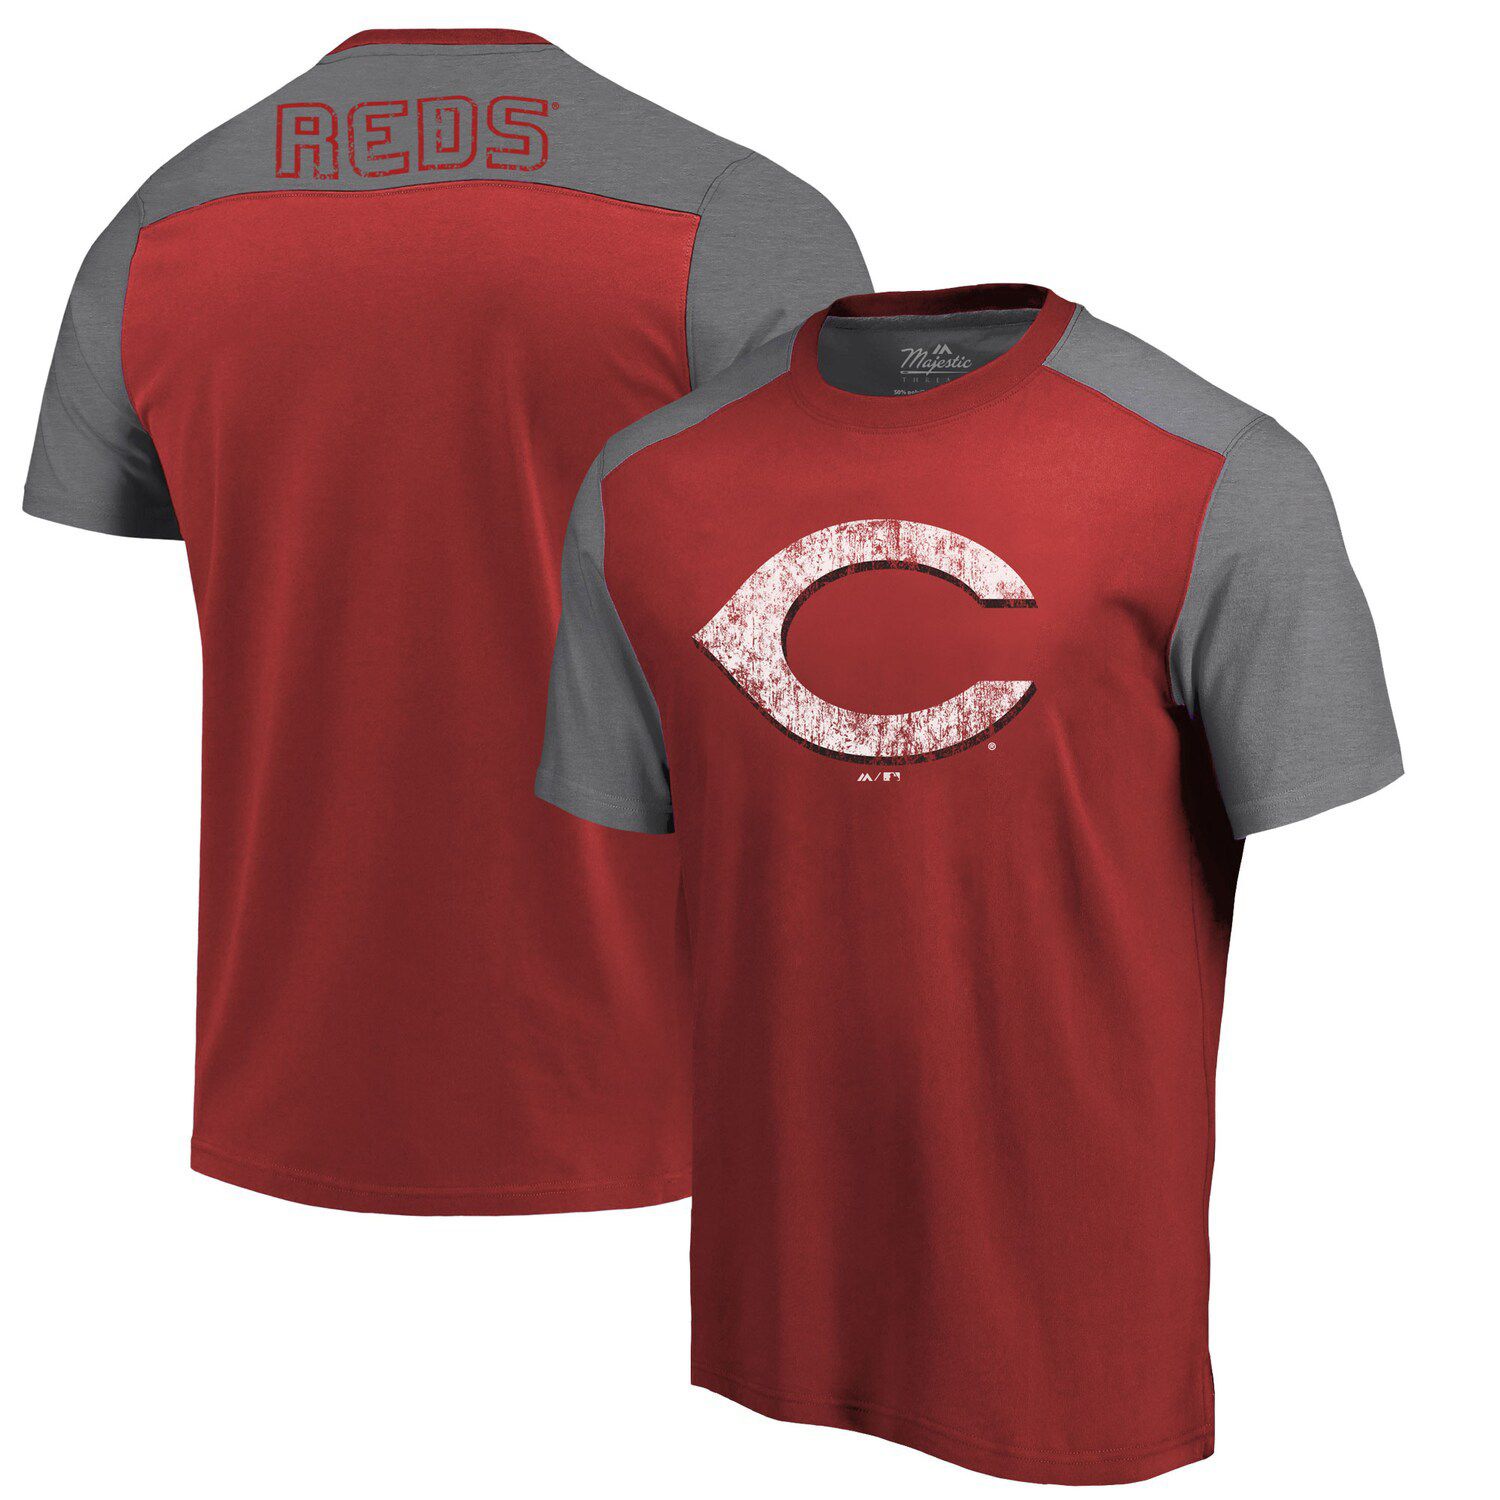 be the reds t shirt